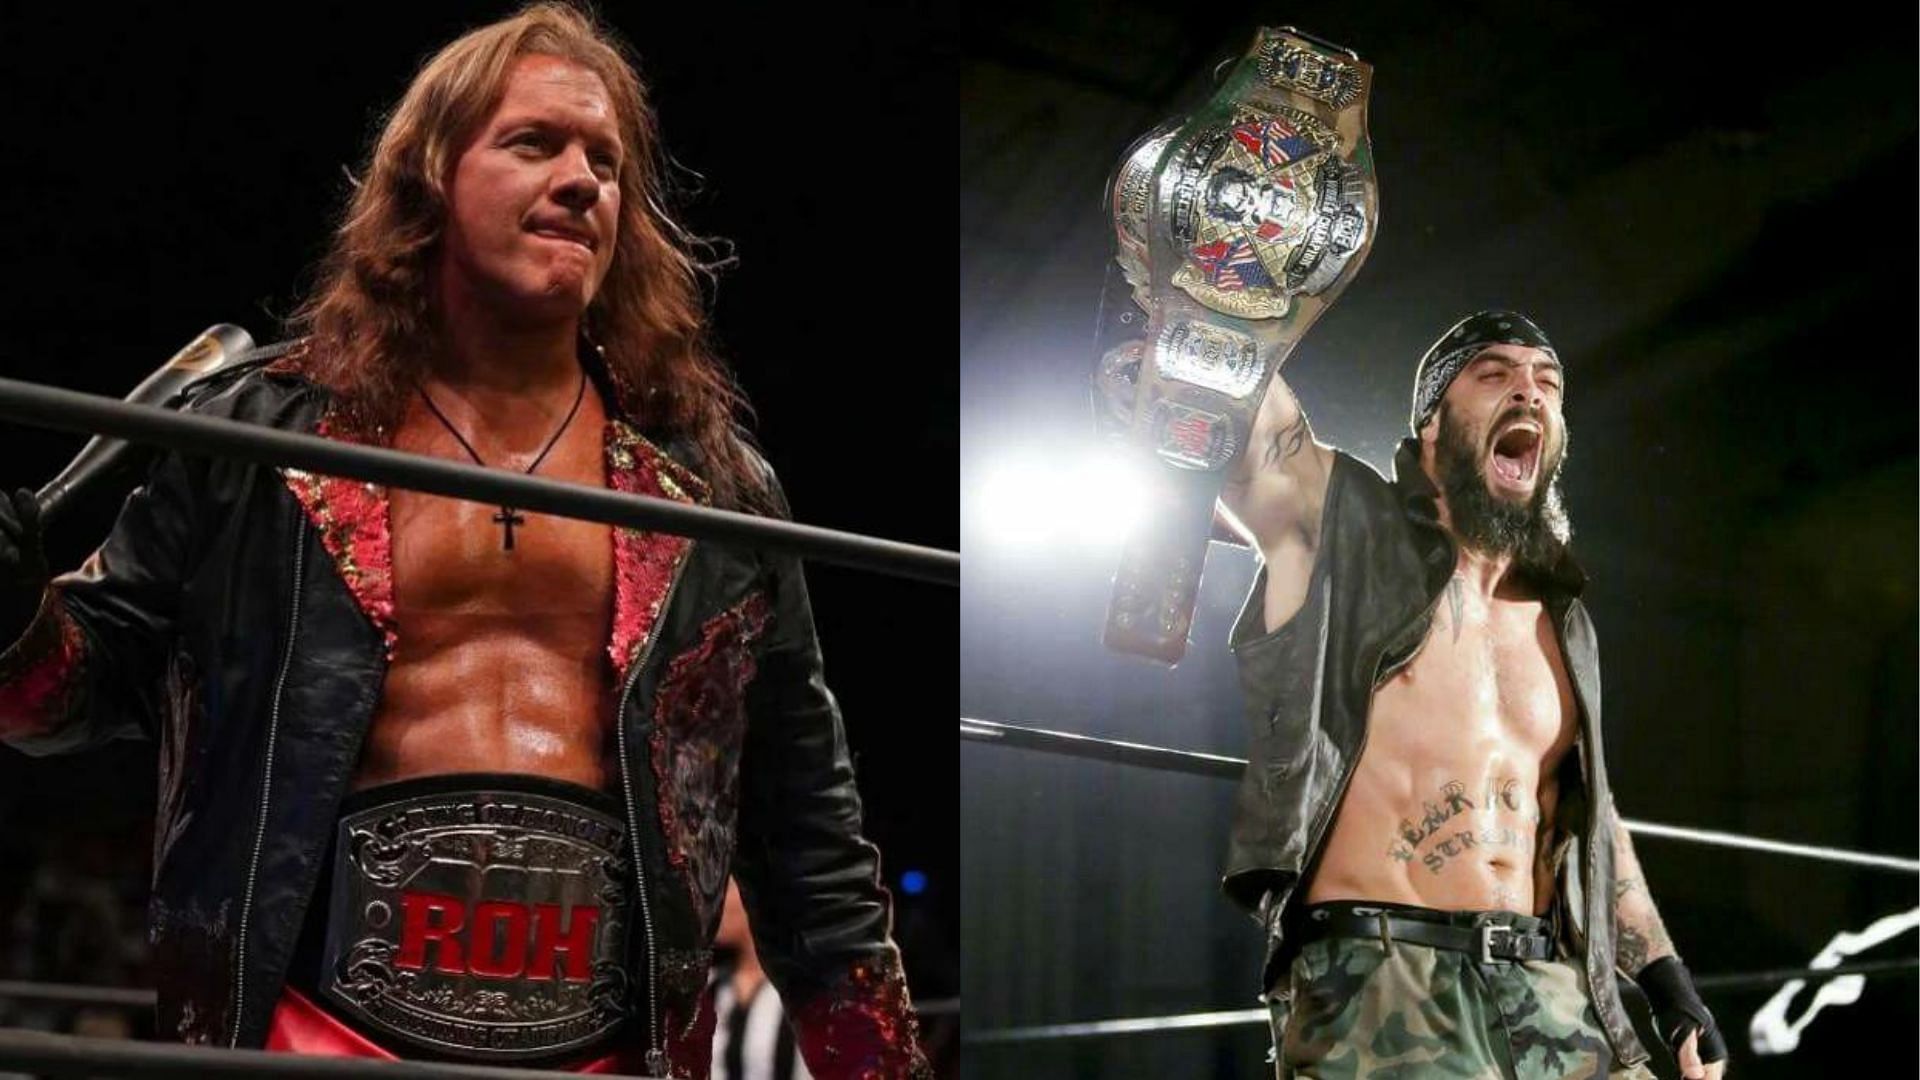 Chris Jericho and Jay Briscoe have both held the ROH World Championship